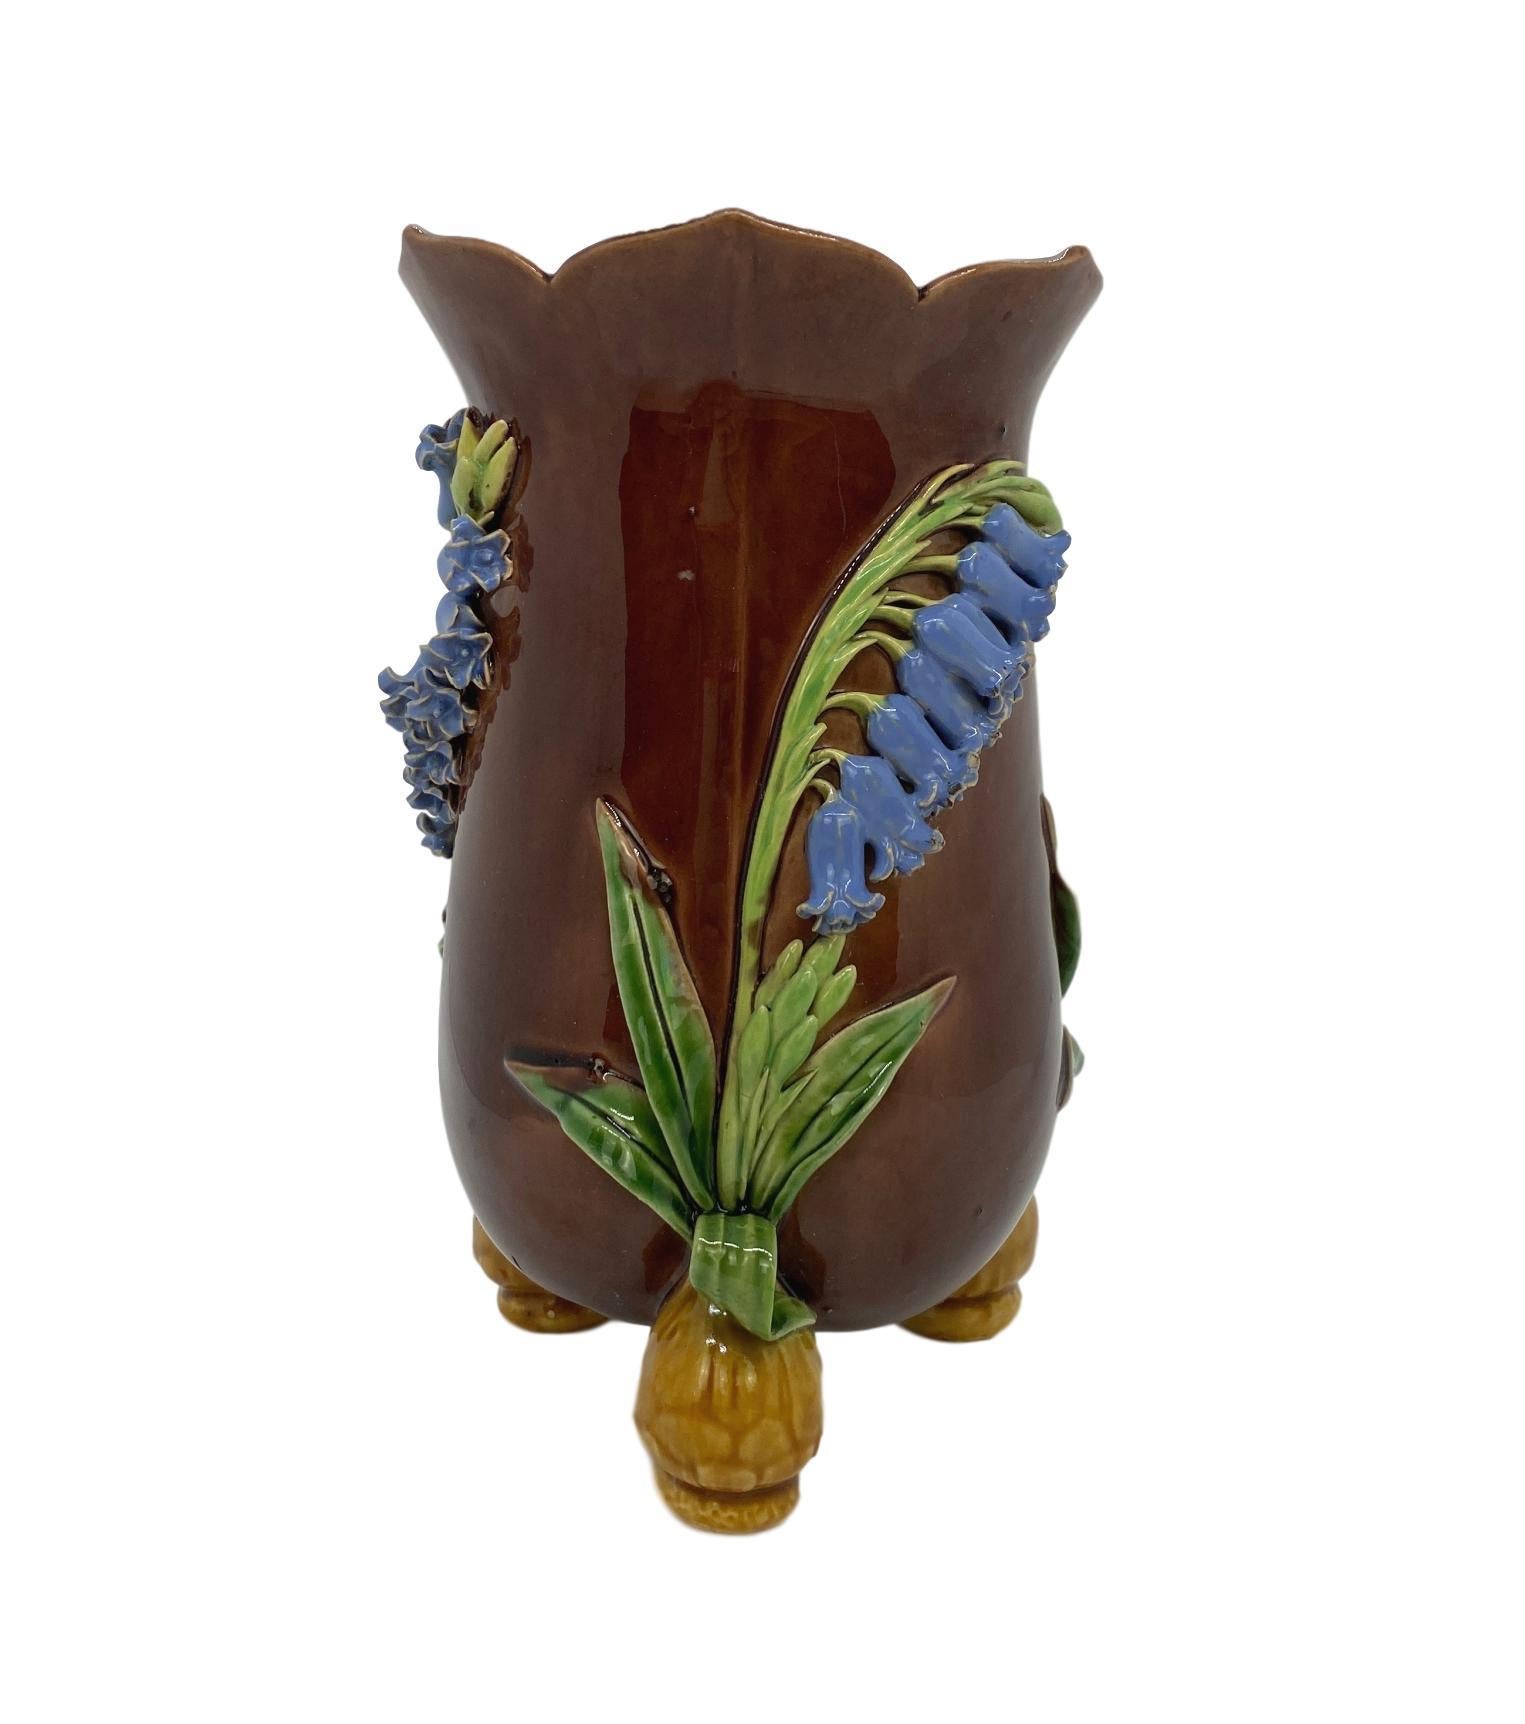 Minton Majolica vase, naturalistically modeled with applied bluebells glazed in periwinkle blue, with green stems, on a richly colored brown ground, the bulb-form feet glazed in light brown, with a periwinkle blue glazed interior, with impressed